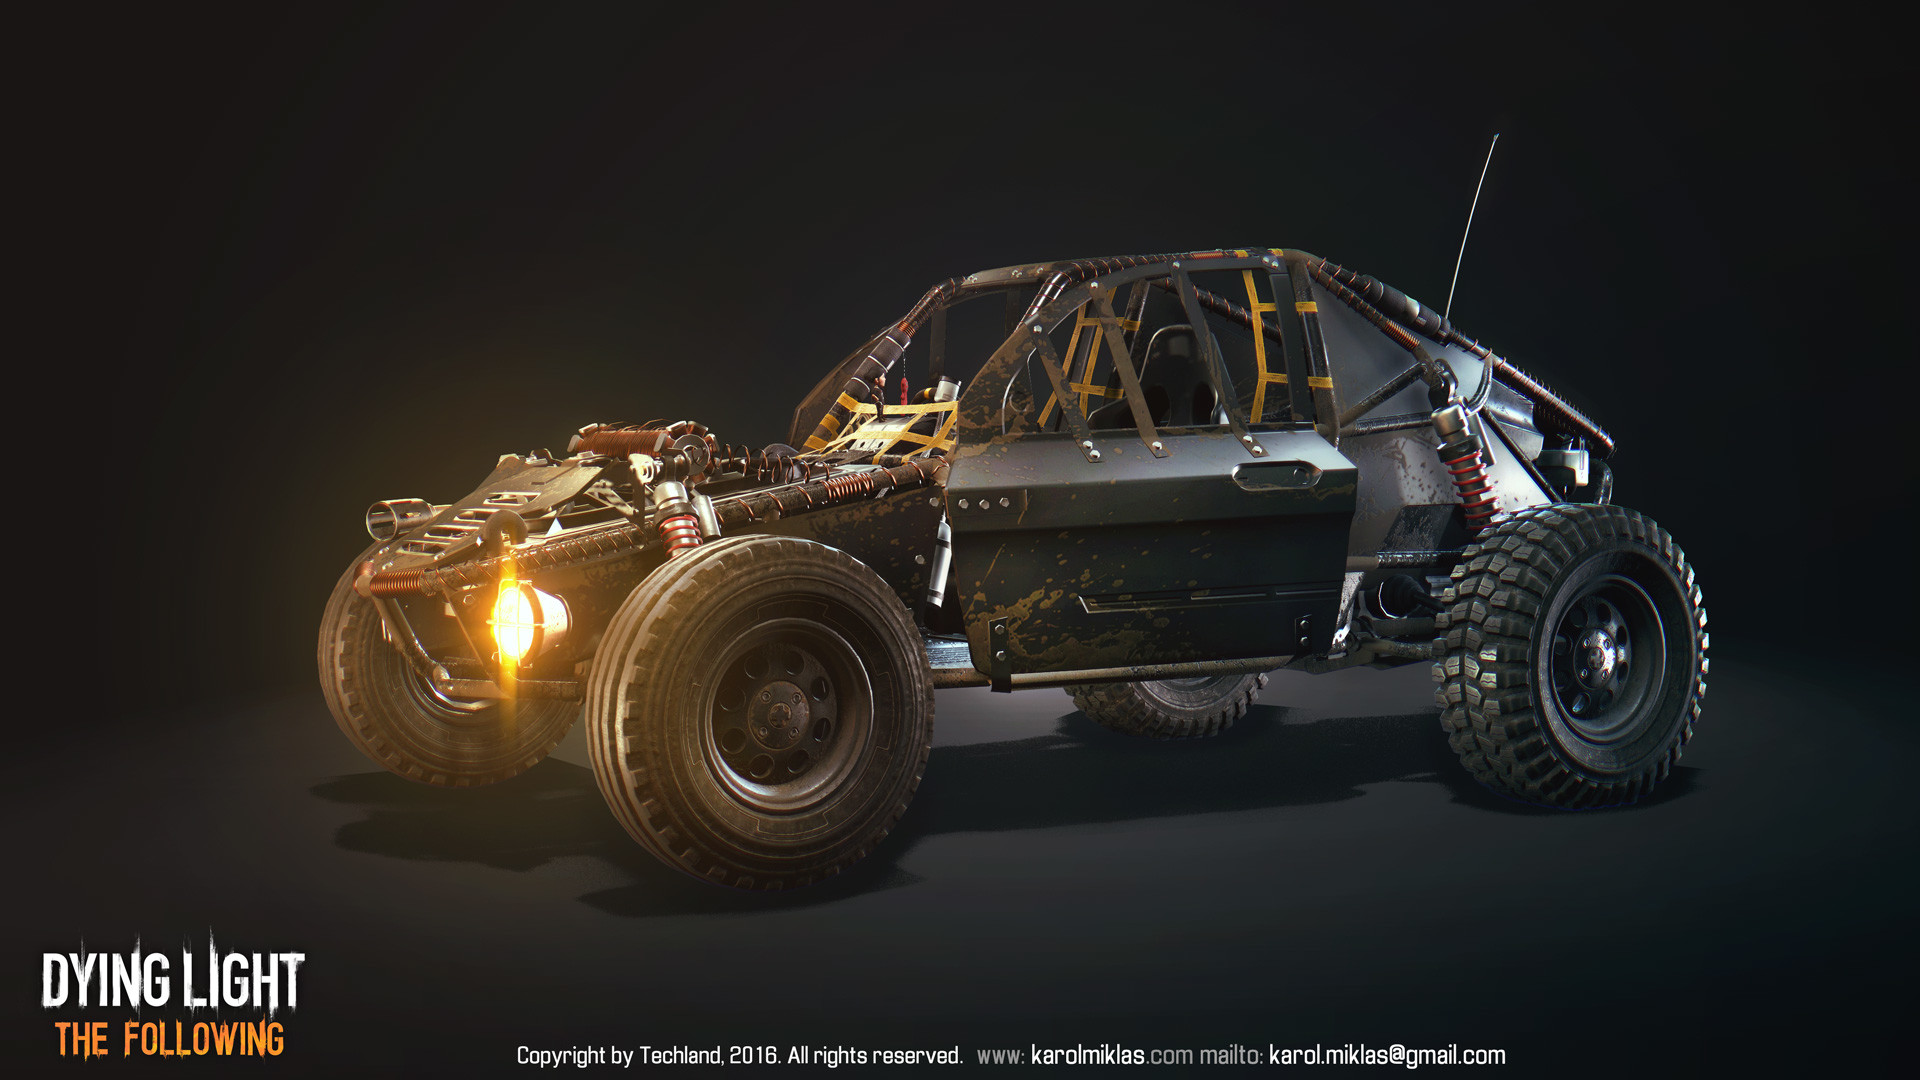 Dying Light The Following Buggy By Kmiklas